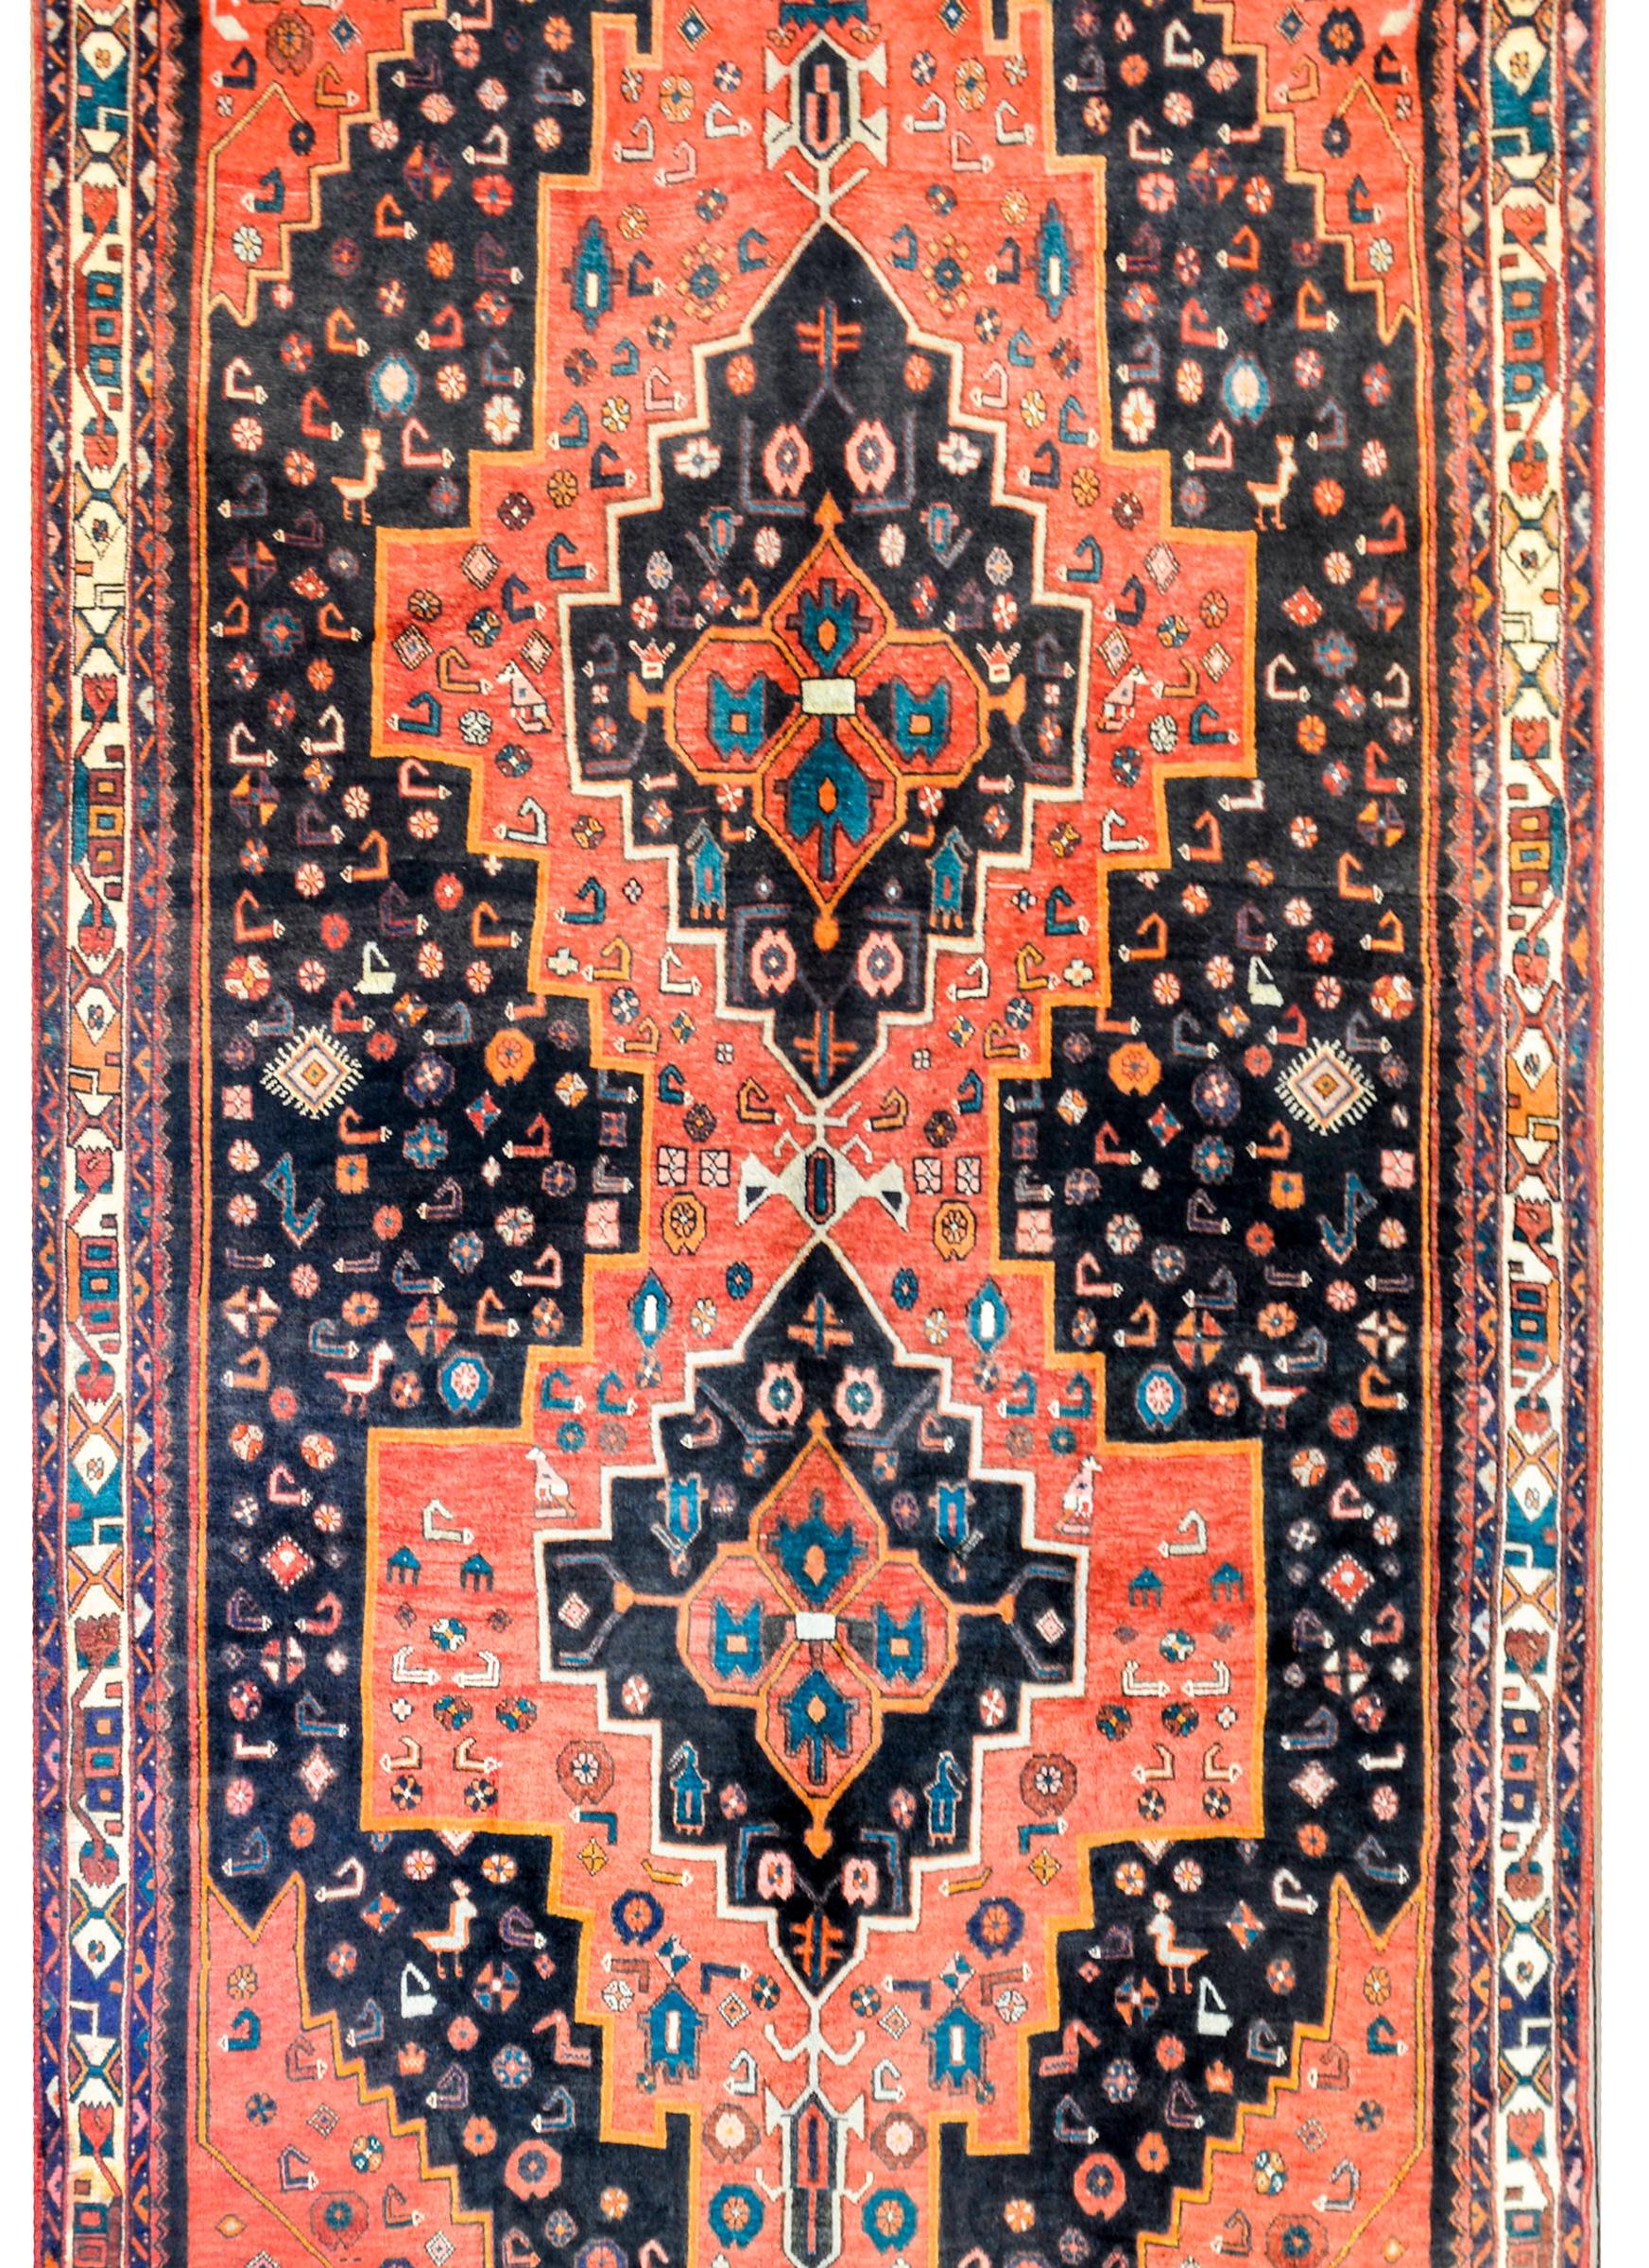 A beautiful vintage Persian Mazleghan rug with two large red stepped diamonds with stylized flowers and chickens on a black field of similar stylized flowers and chickens. The border is complex with bold stylized flowers and thin geometric patterned